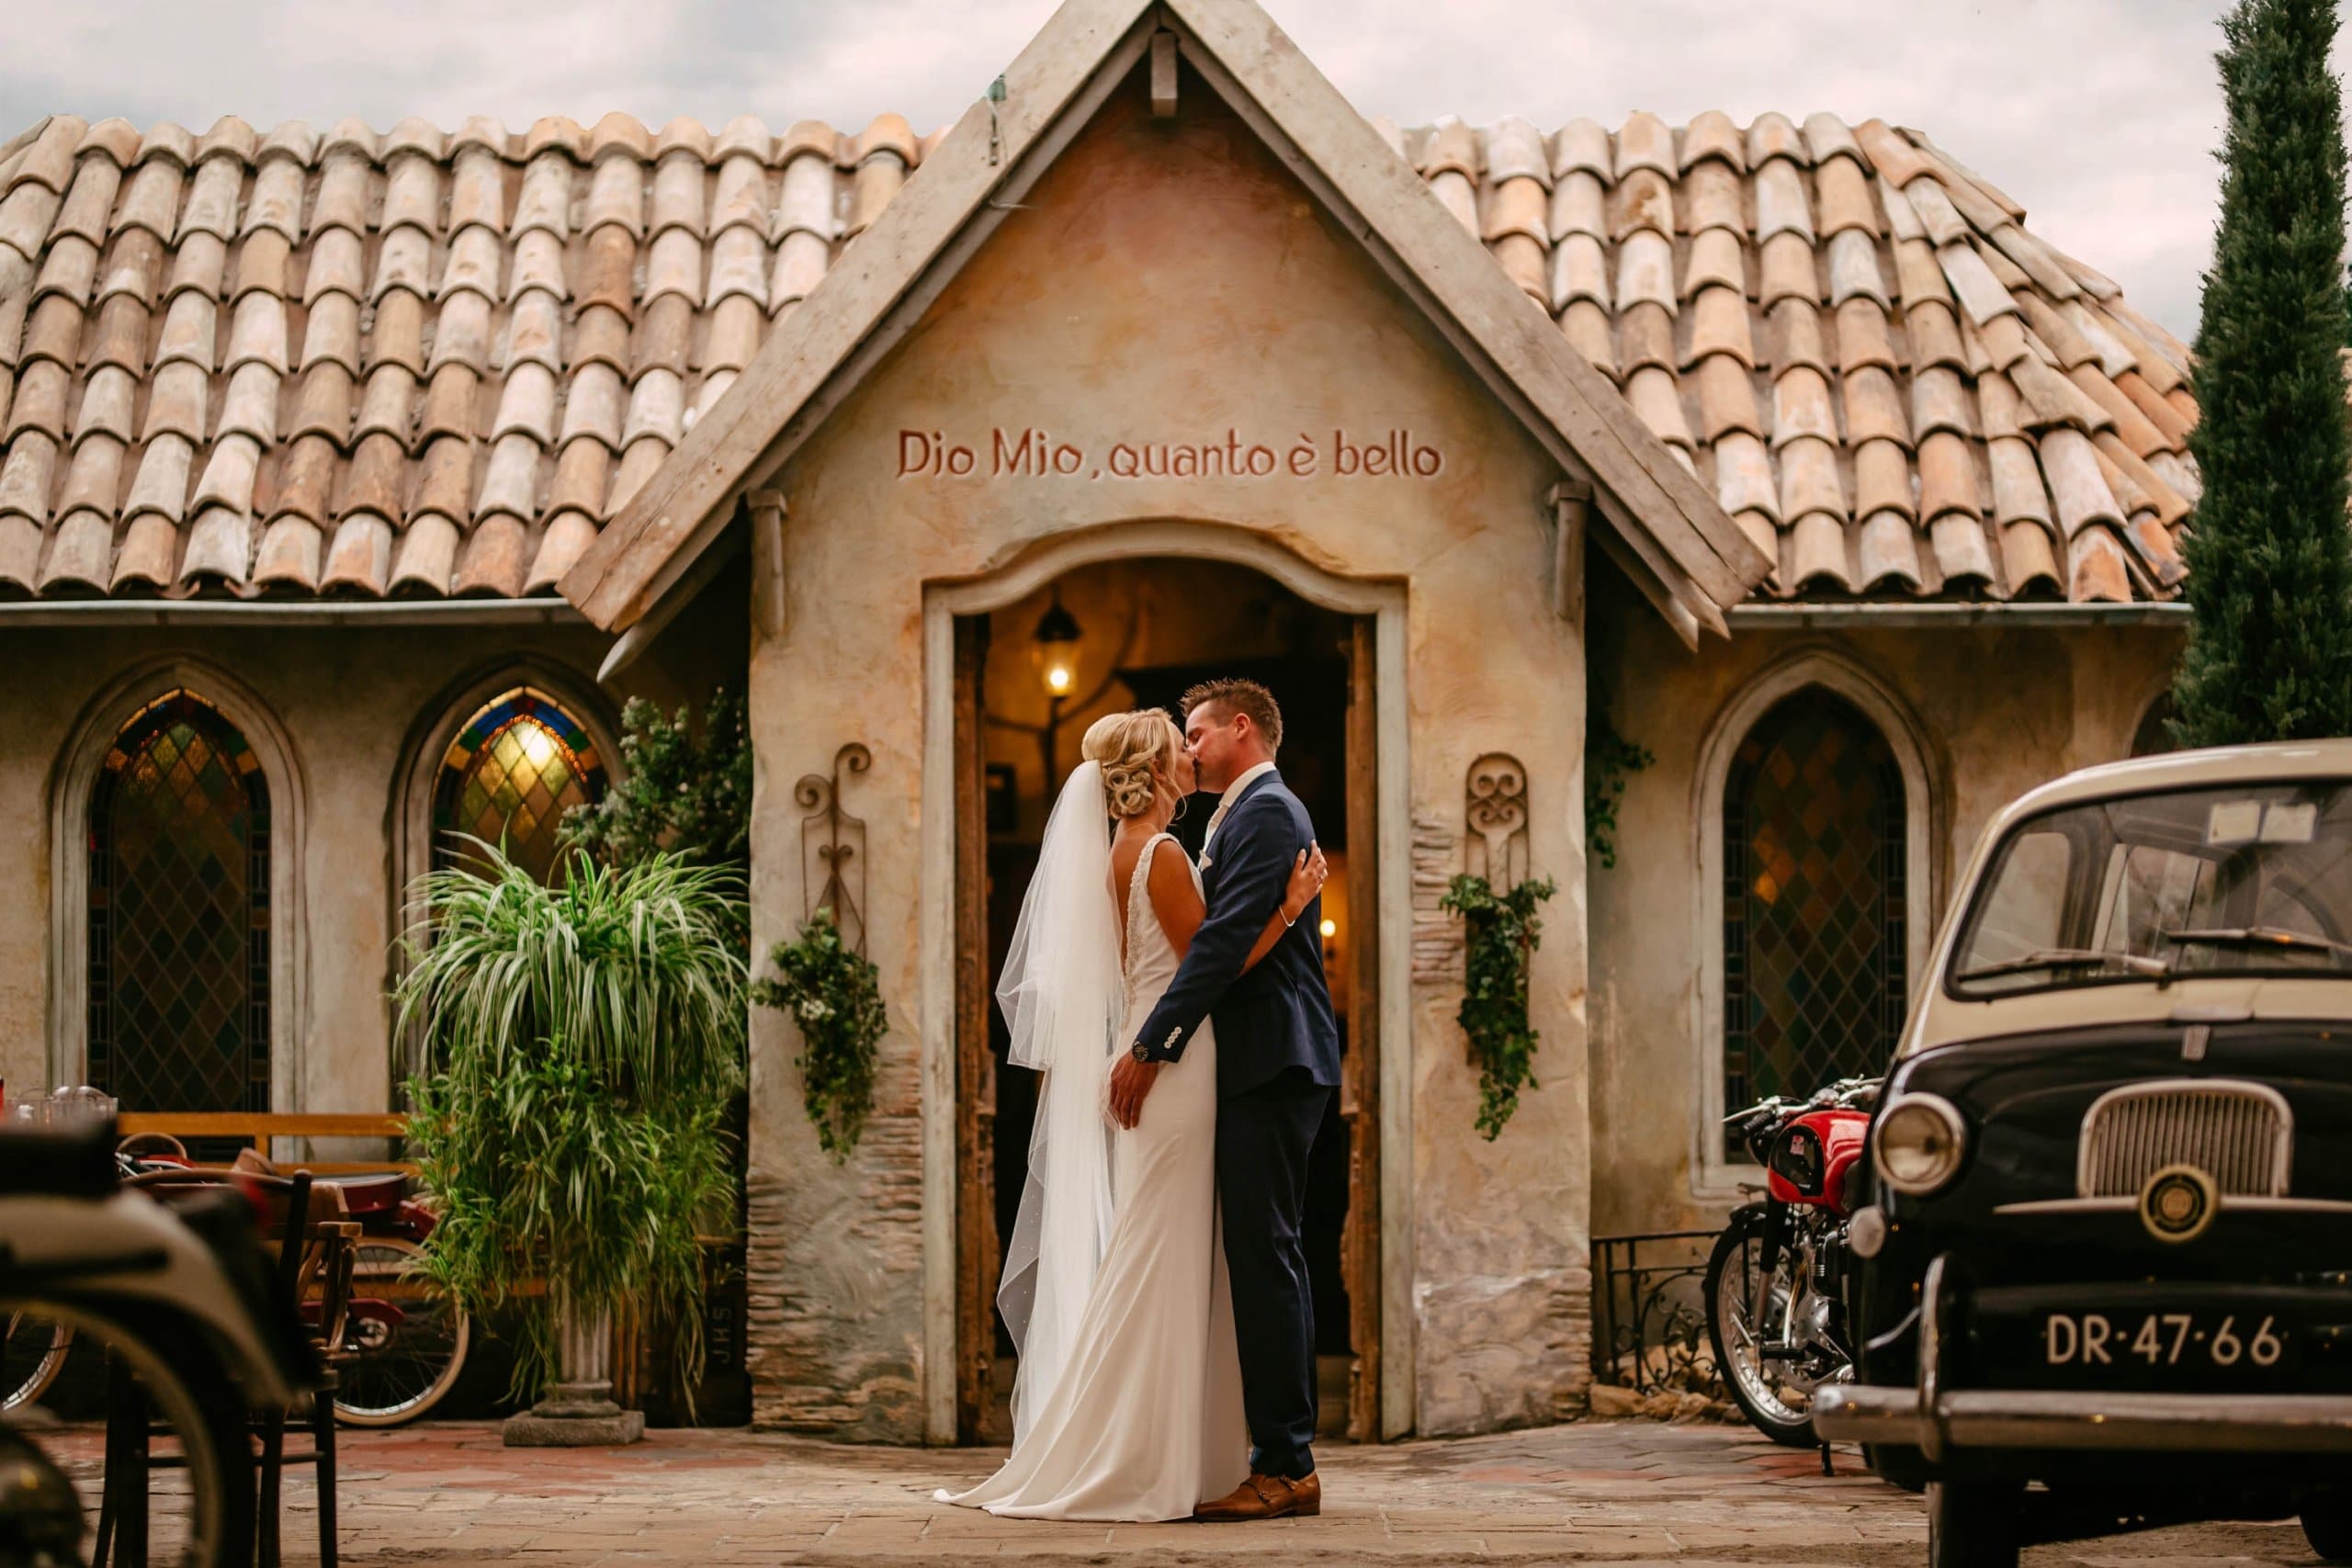 A bride and groom kiss in front of a restaurant.